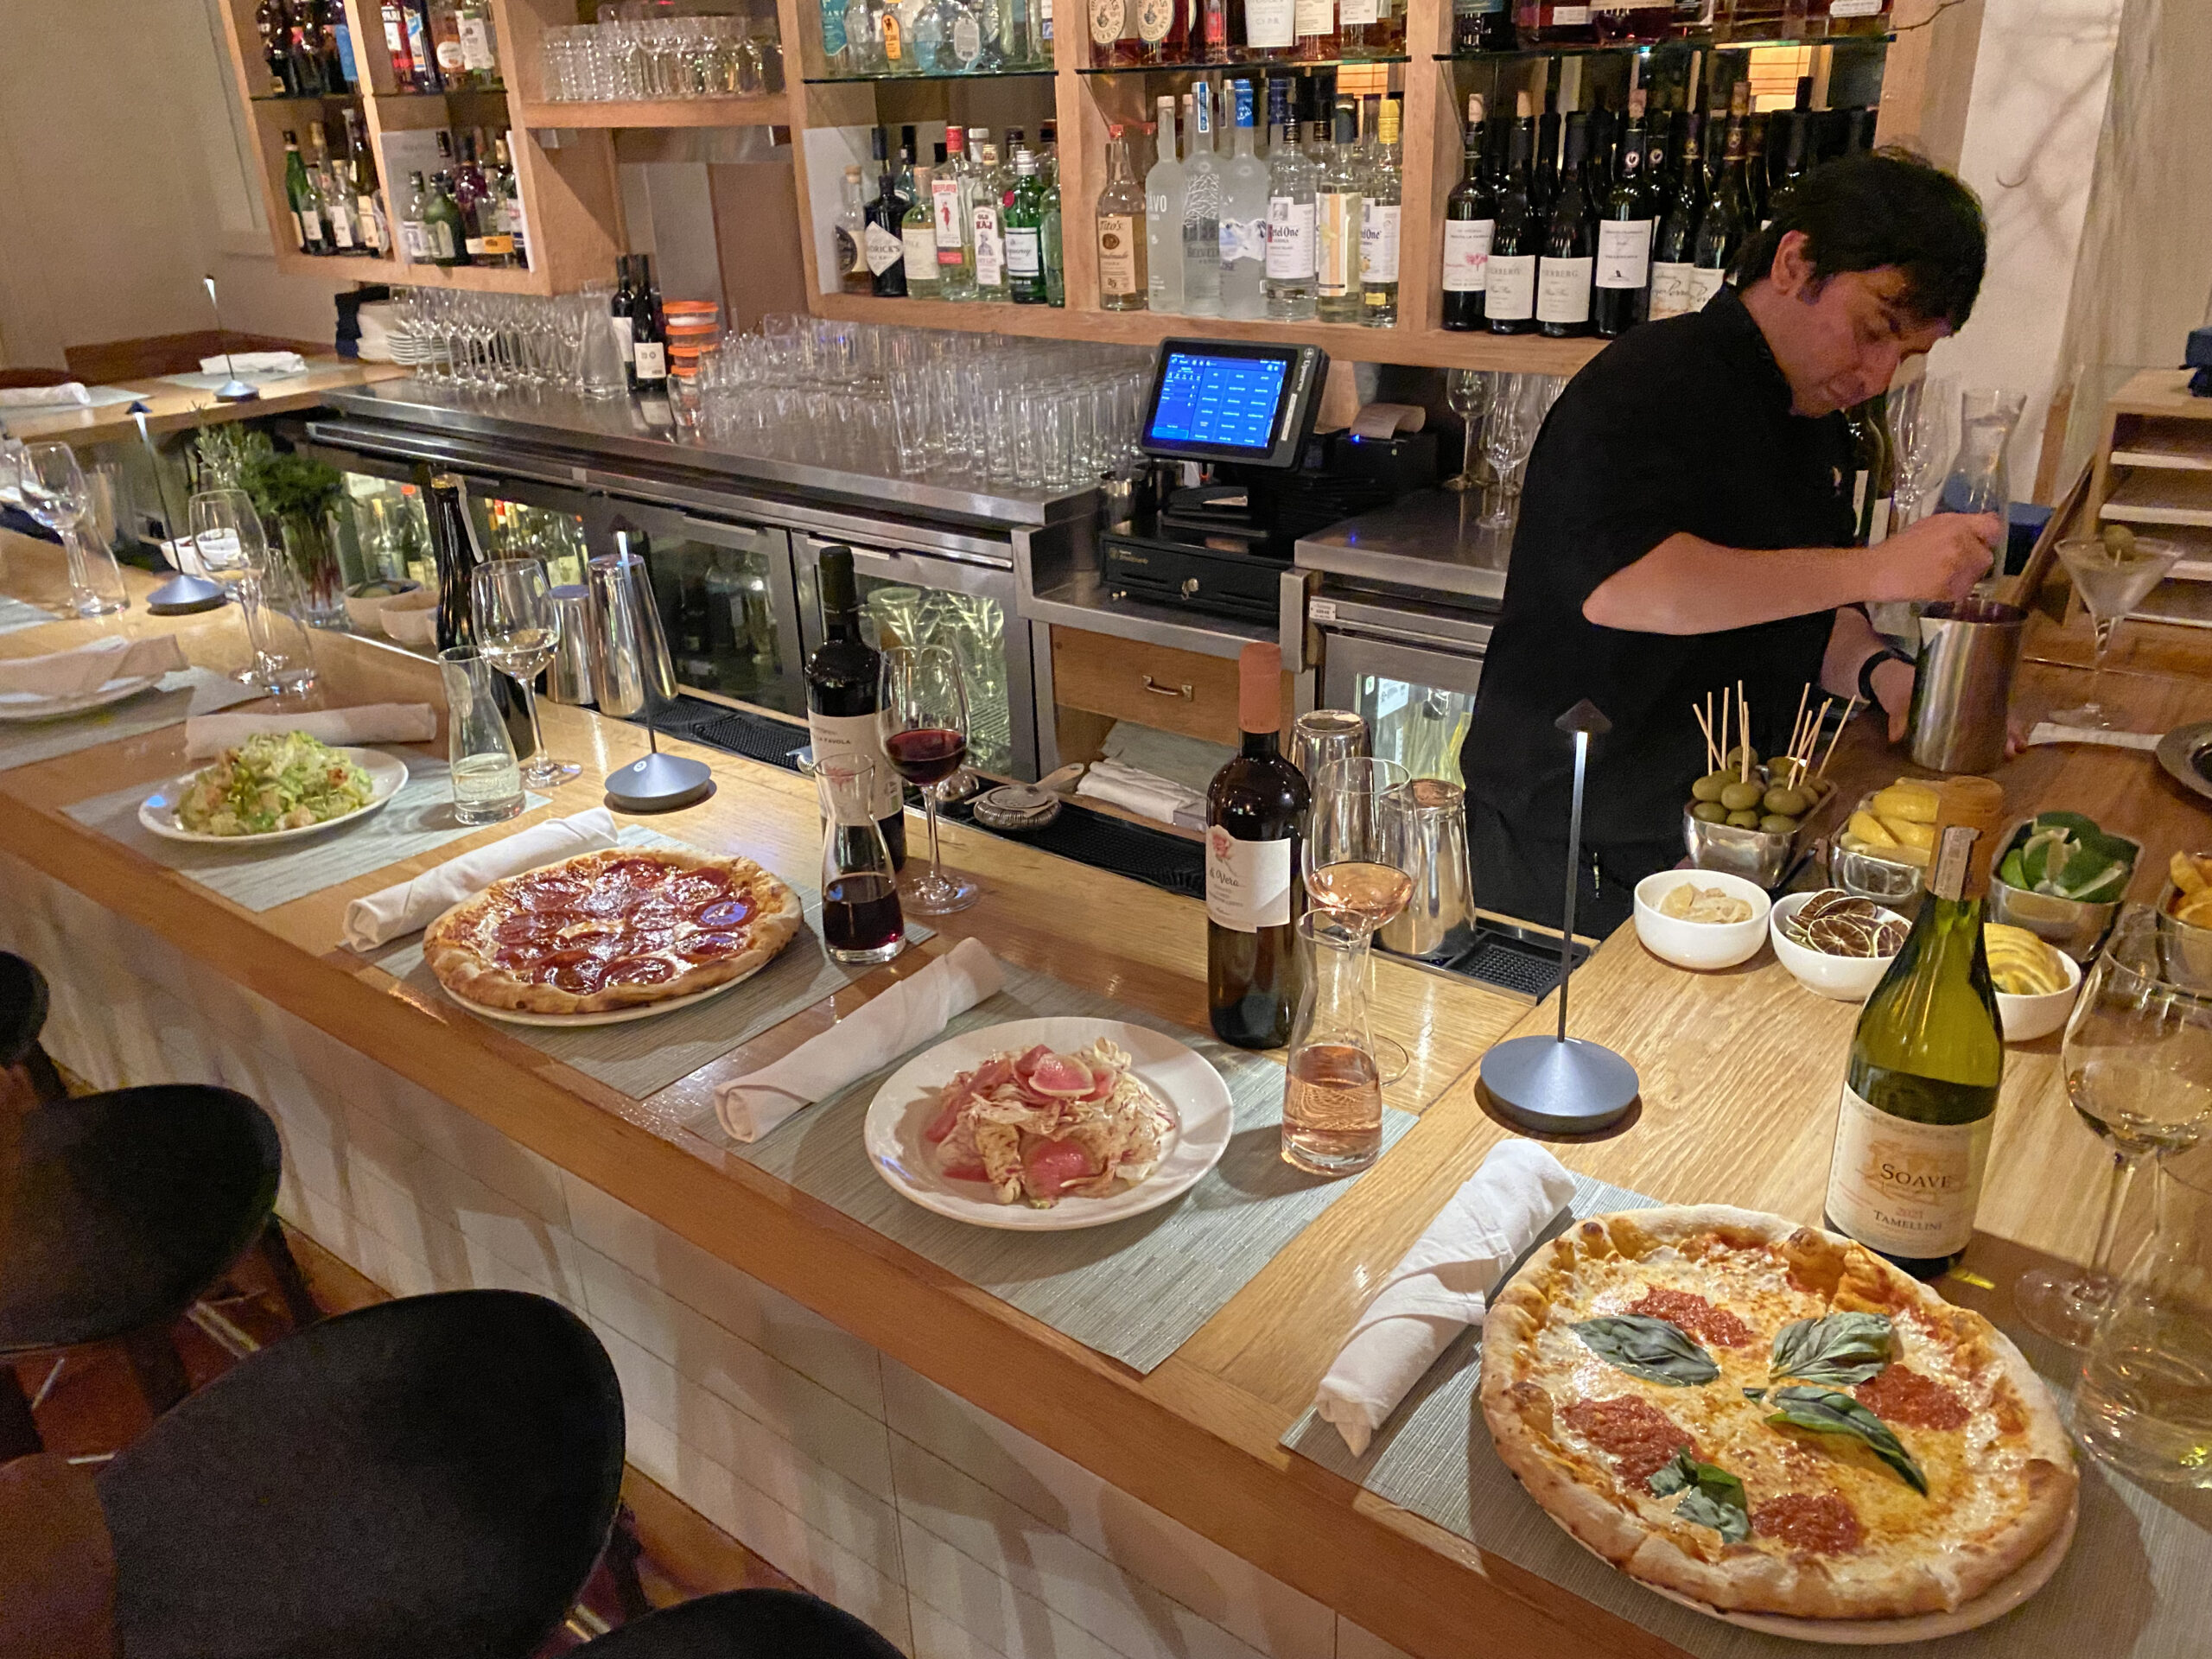 A pizza and wine special is offered at the bar at Nick & Toni's. COURTESY NICK & TONI'S